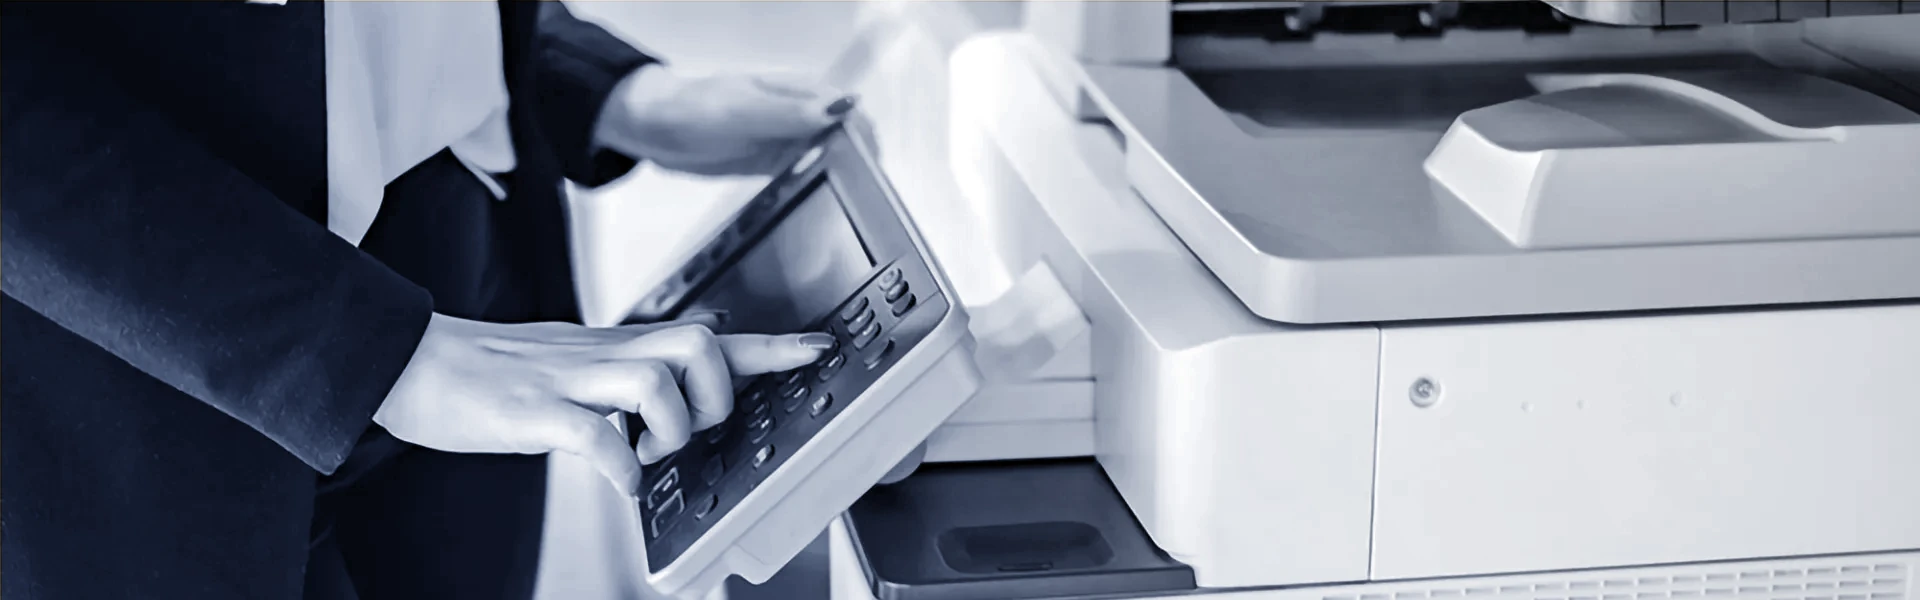 Solutions by Device - Multifunction Copiers